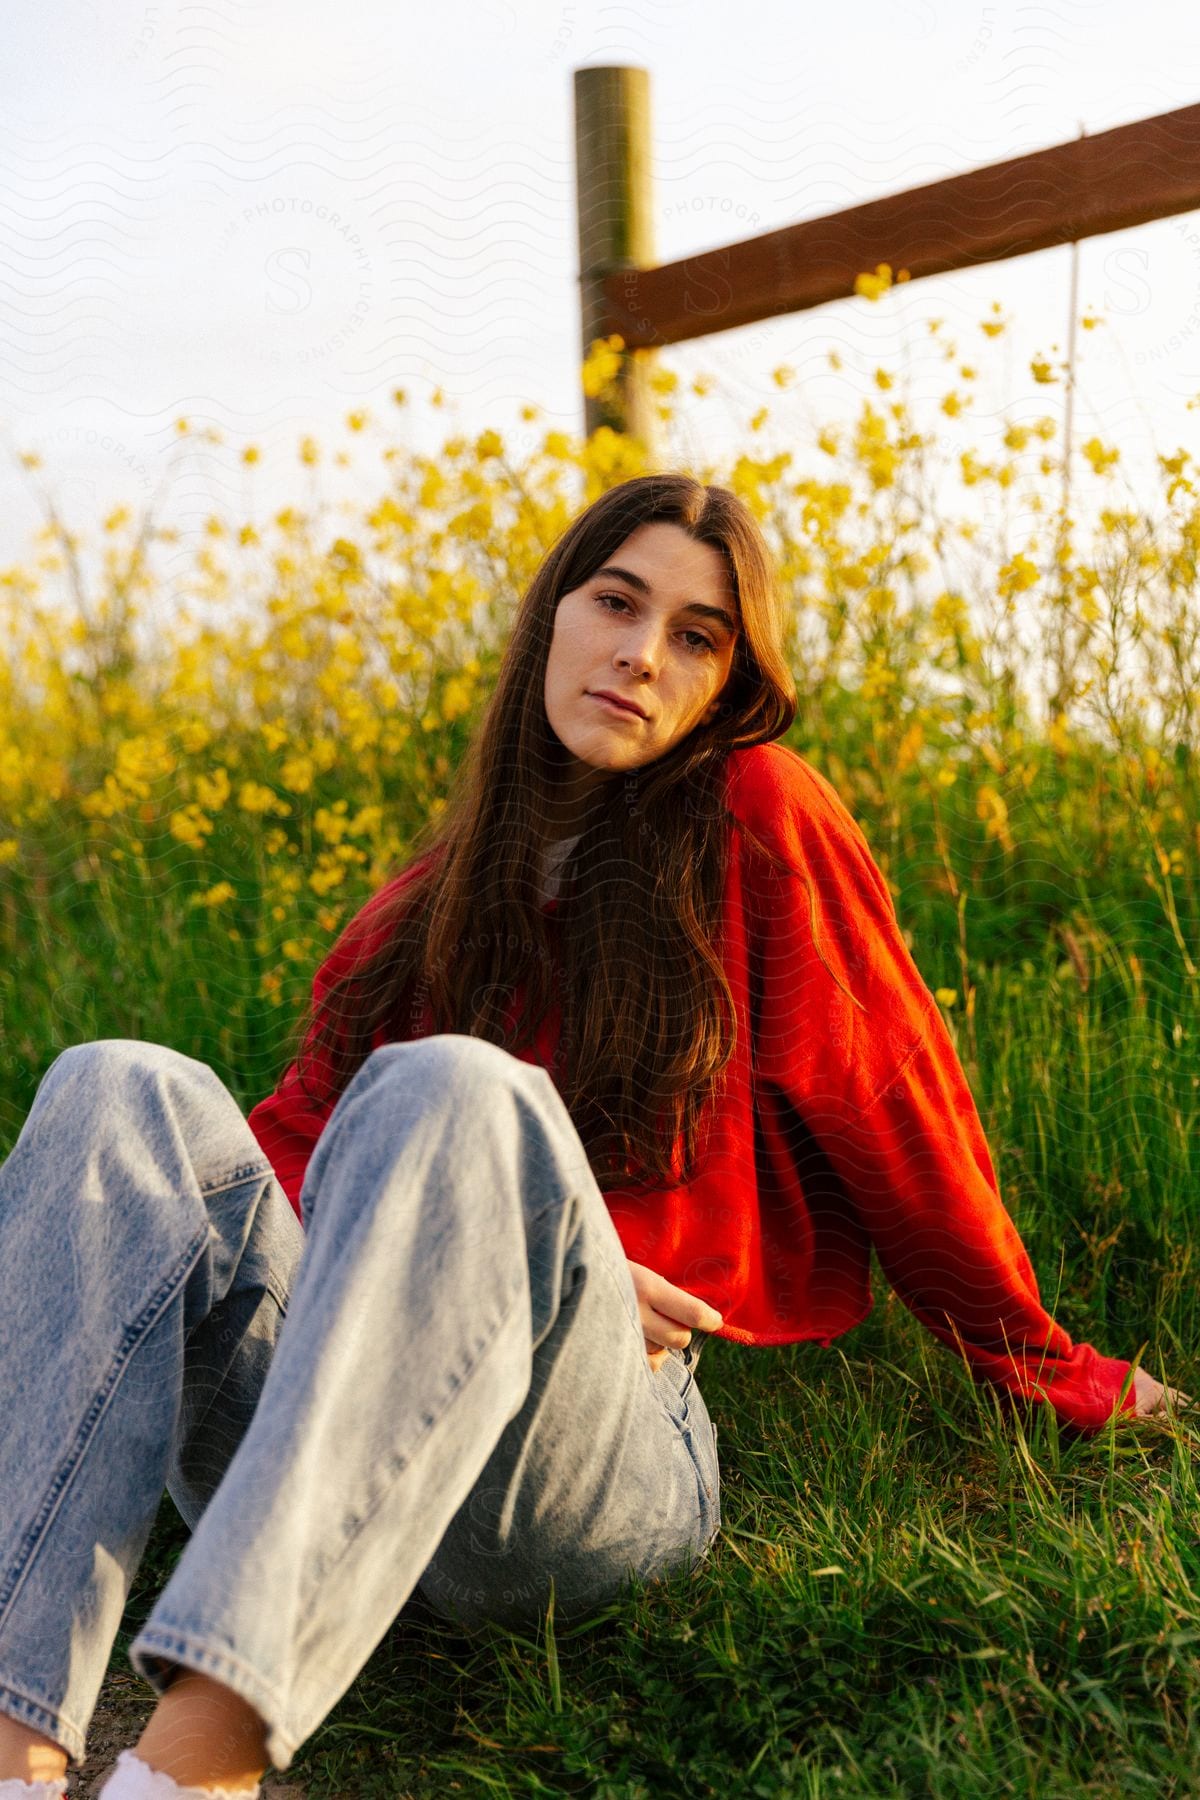 A teenage girl sitting on the grass near yellow flowers